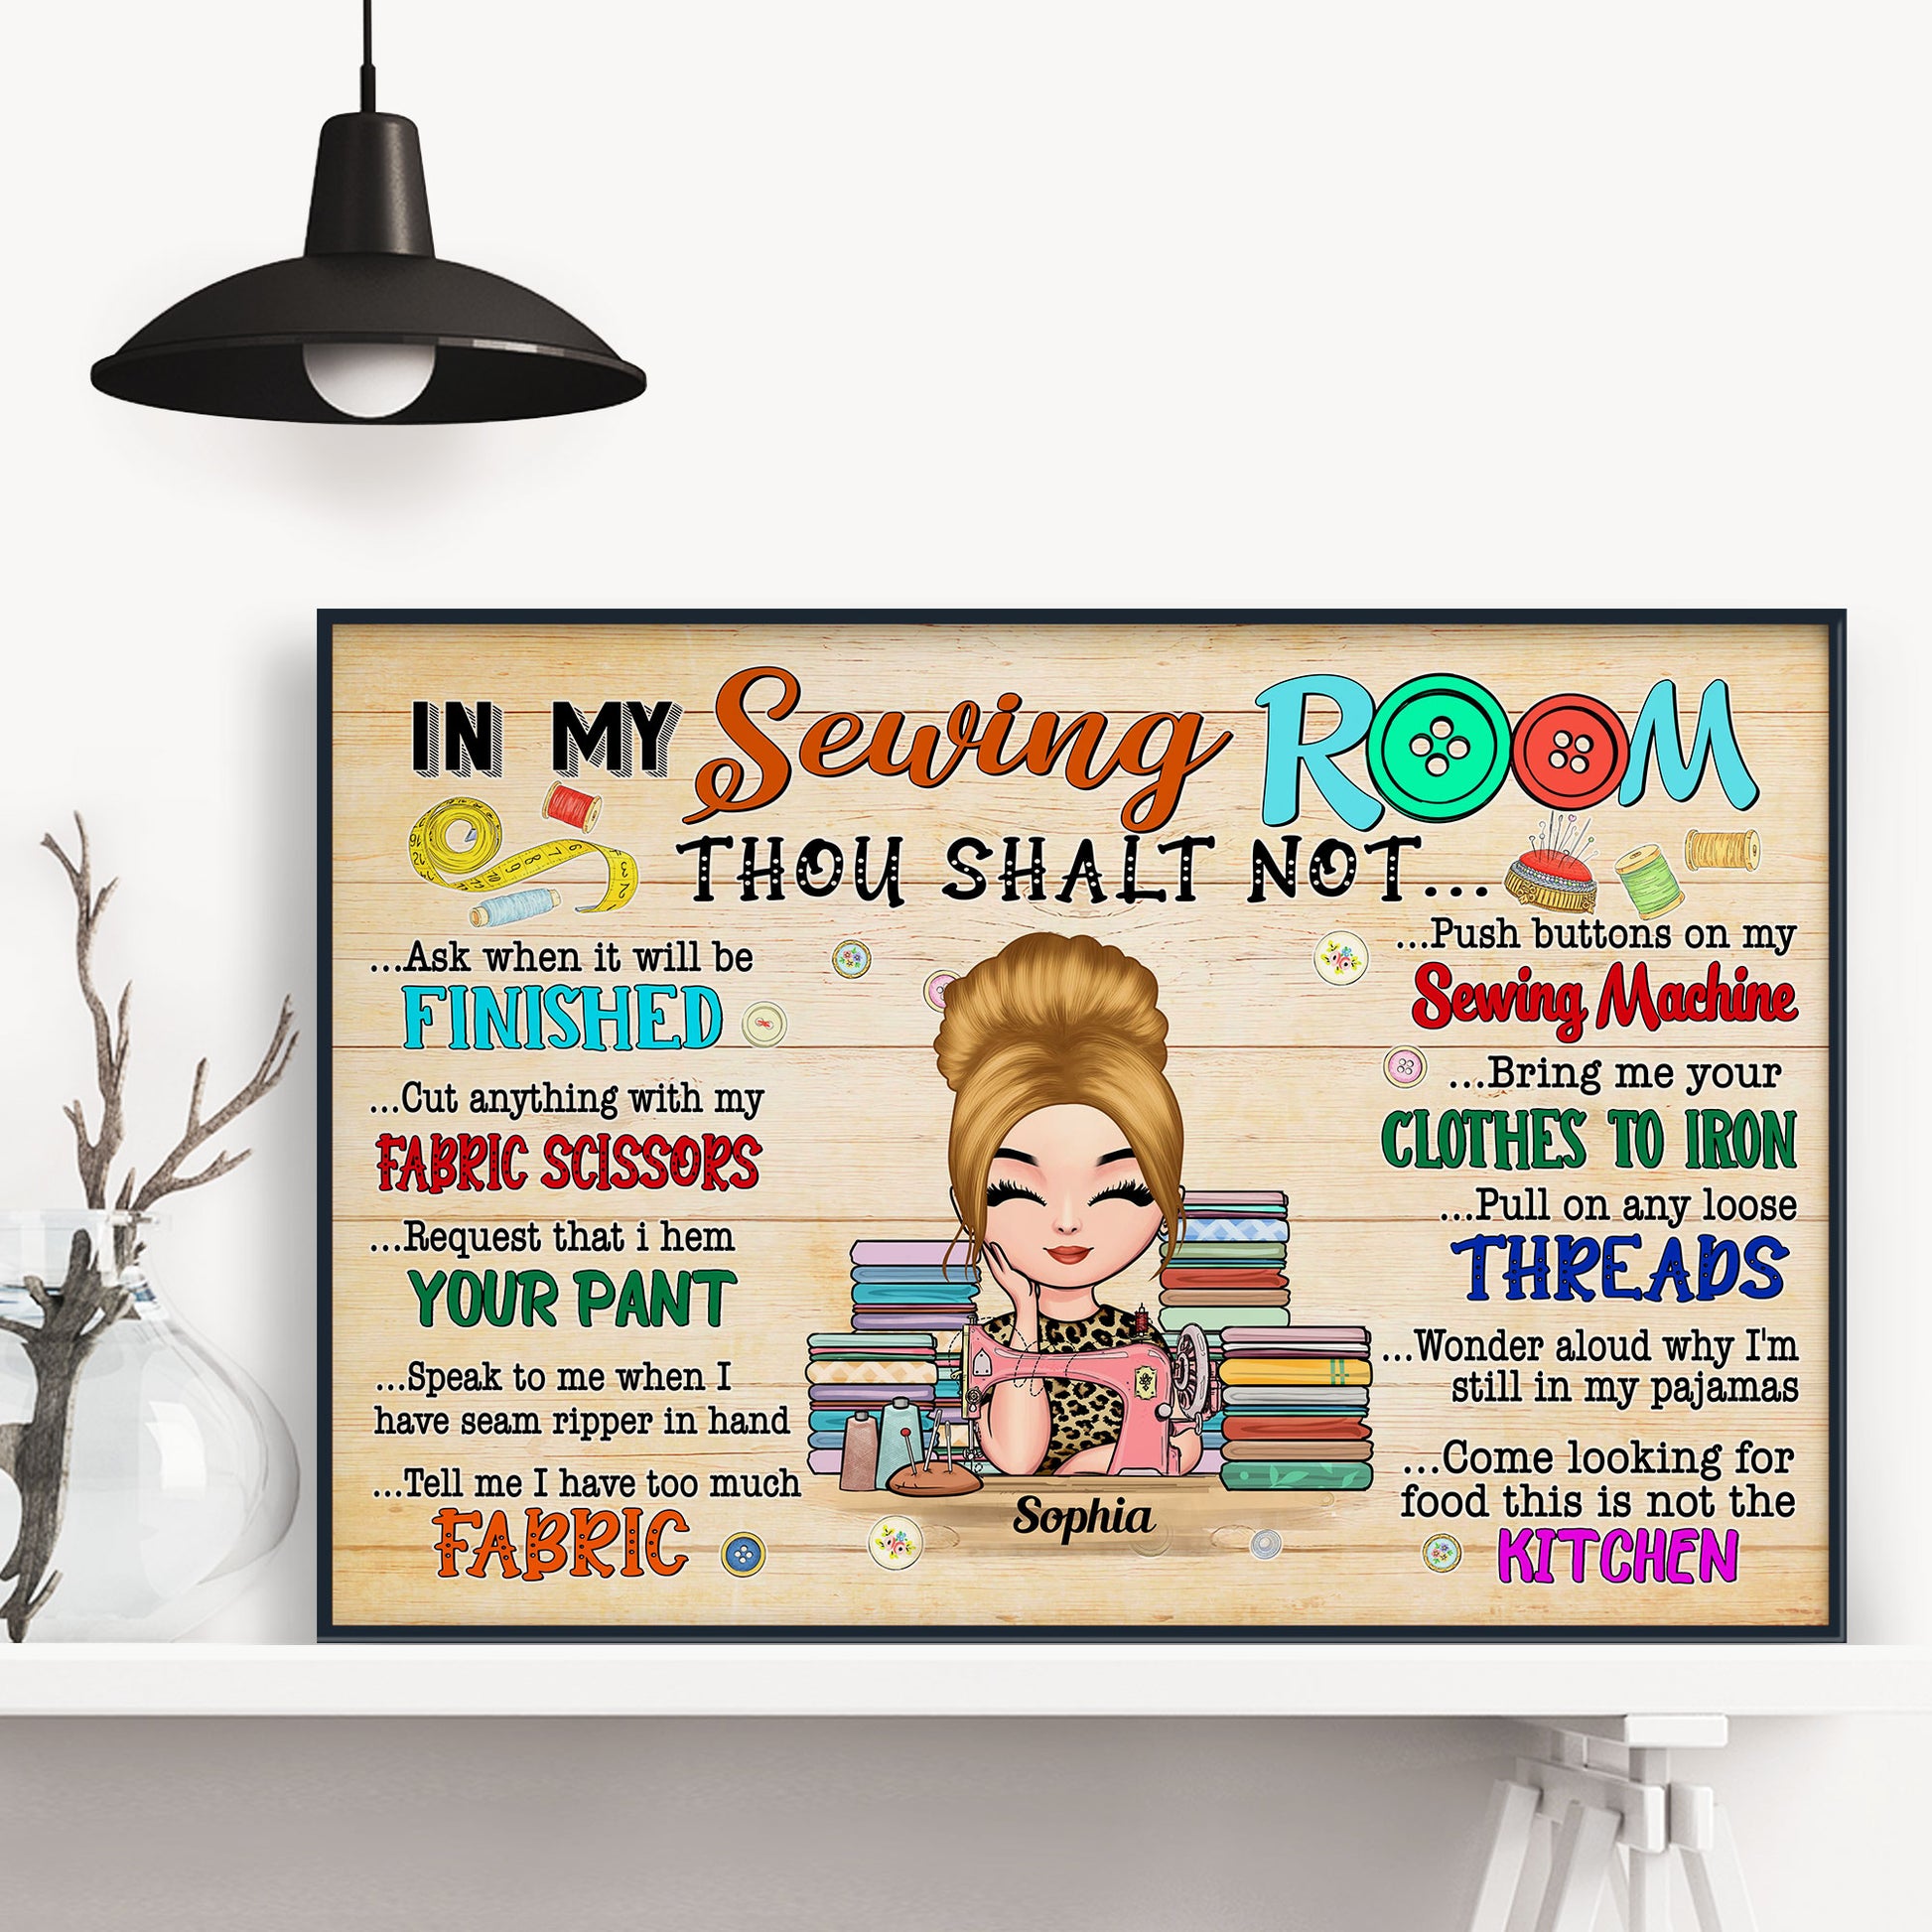 Sorry I Can't I'm Sew Busy Sewing Lover Gift - Sewing - Posters